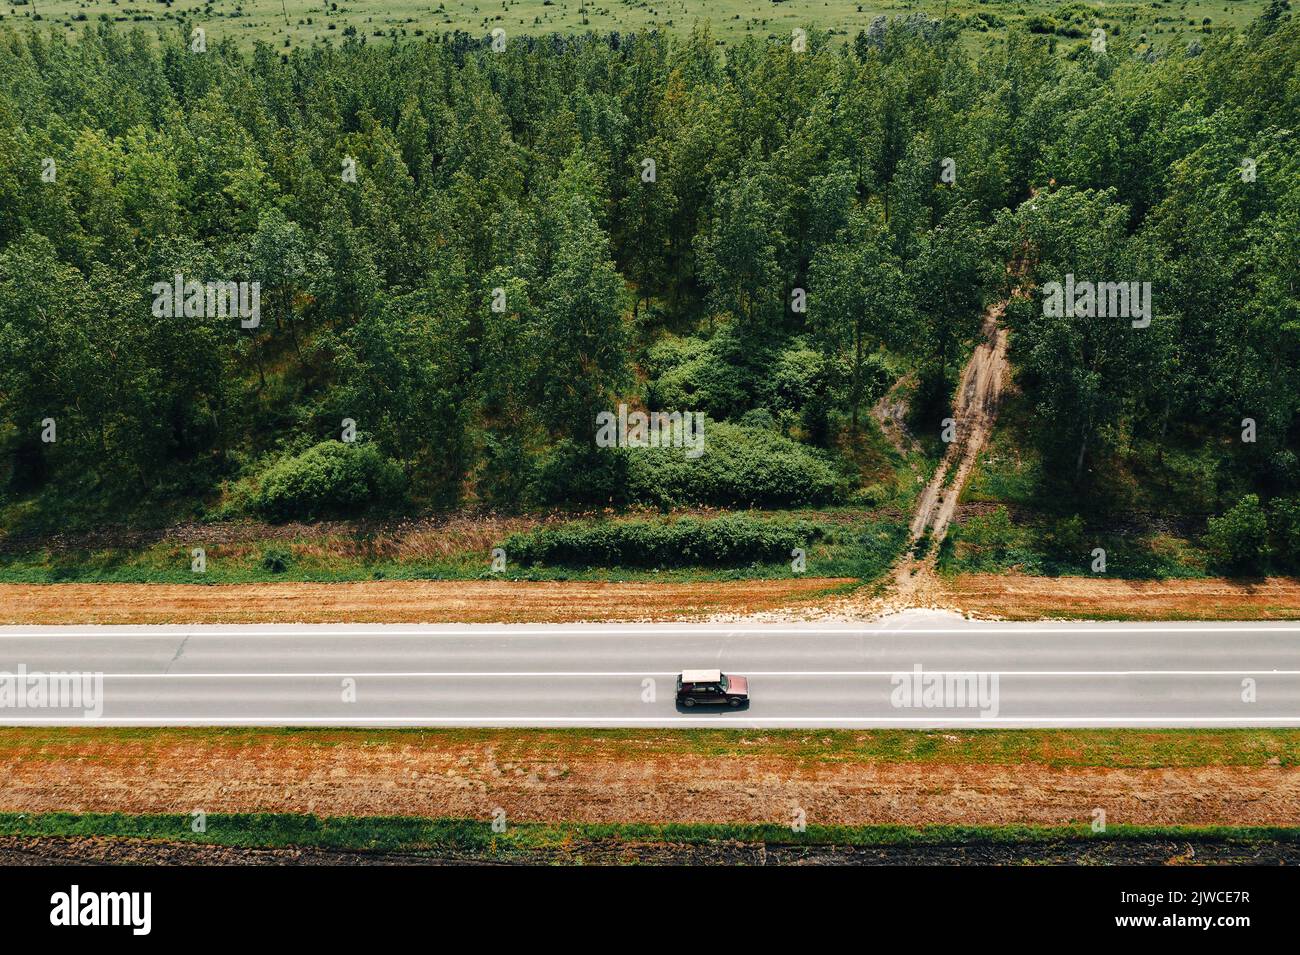 Old car transporting plasterboards on roof through non-urban wooded landscape, aerial view Stock Photo